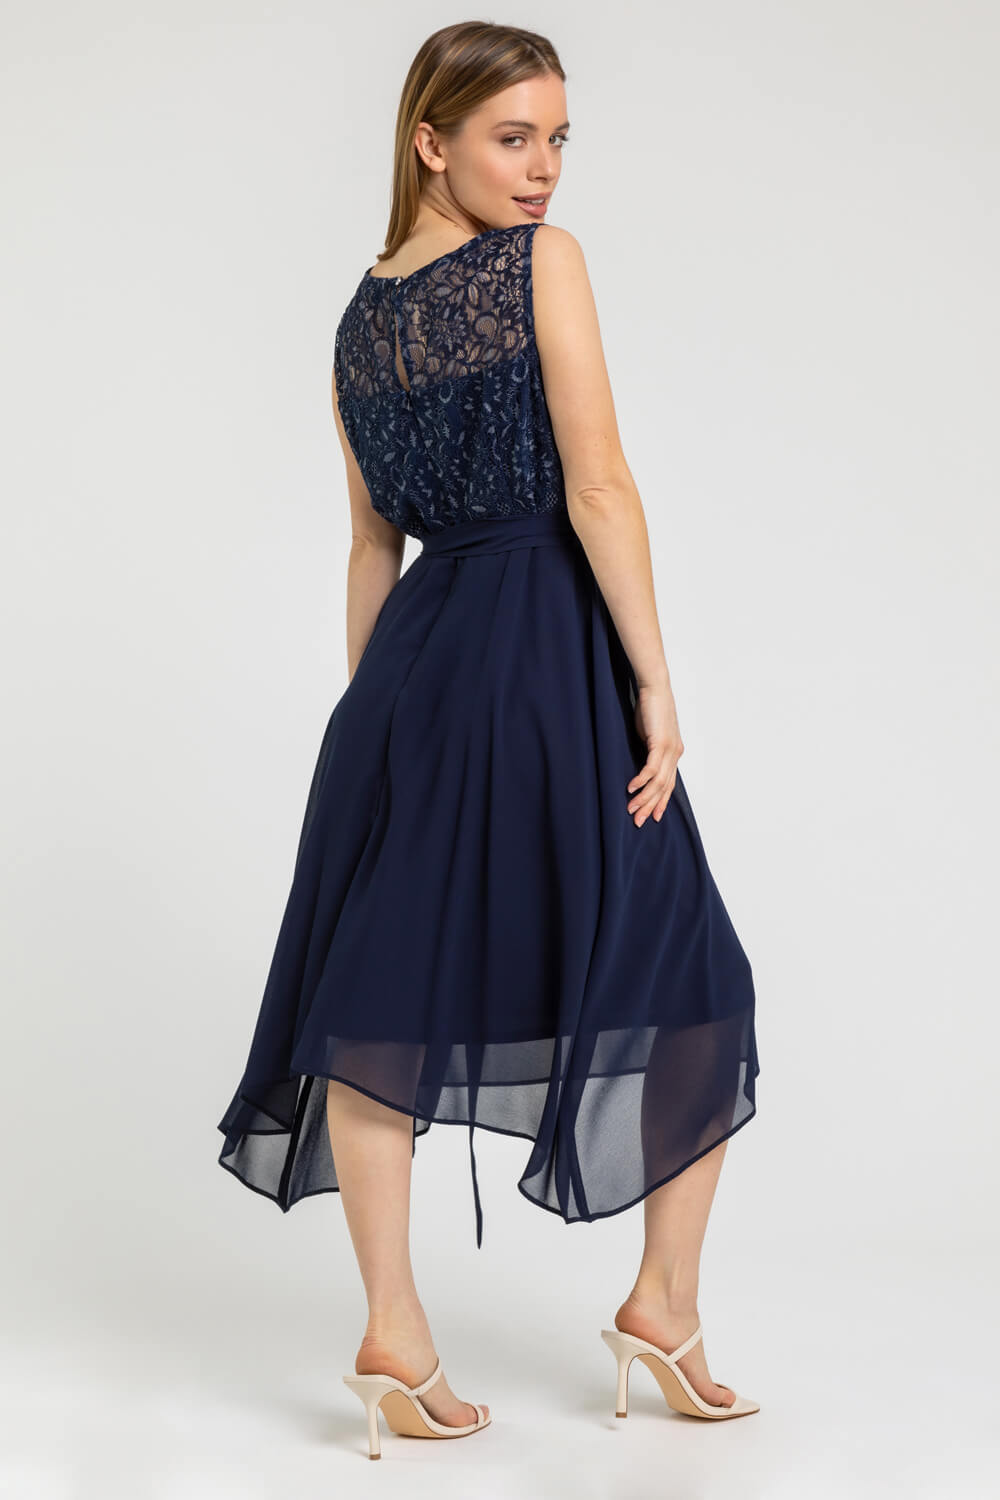 Petite Lace Detail Fit And Flare Dress in Navy | Roman UK